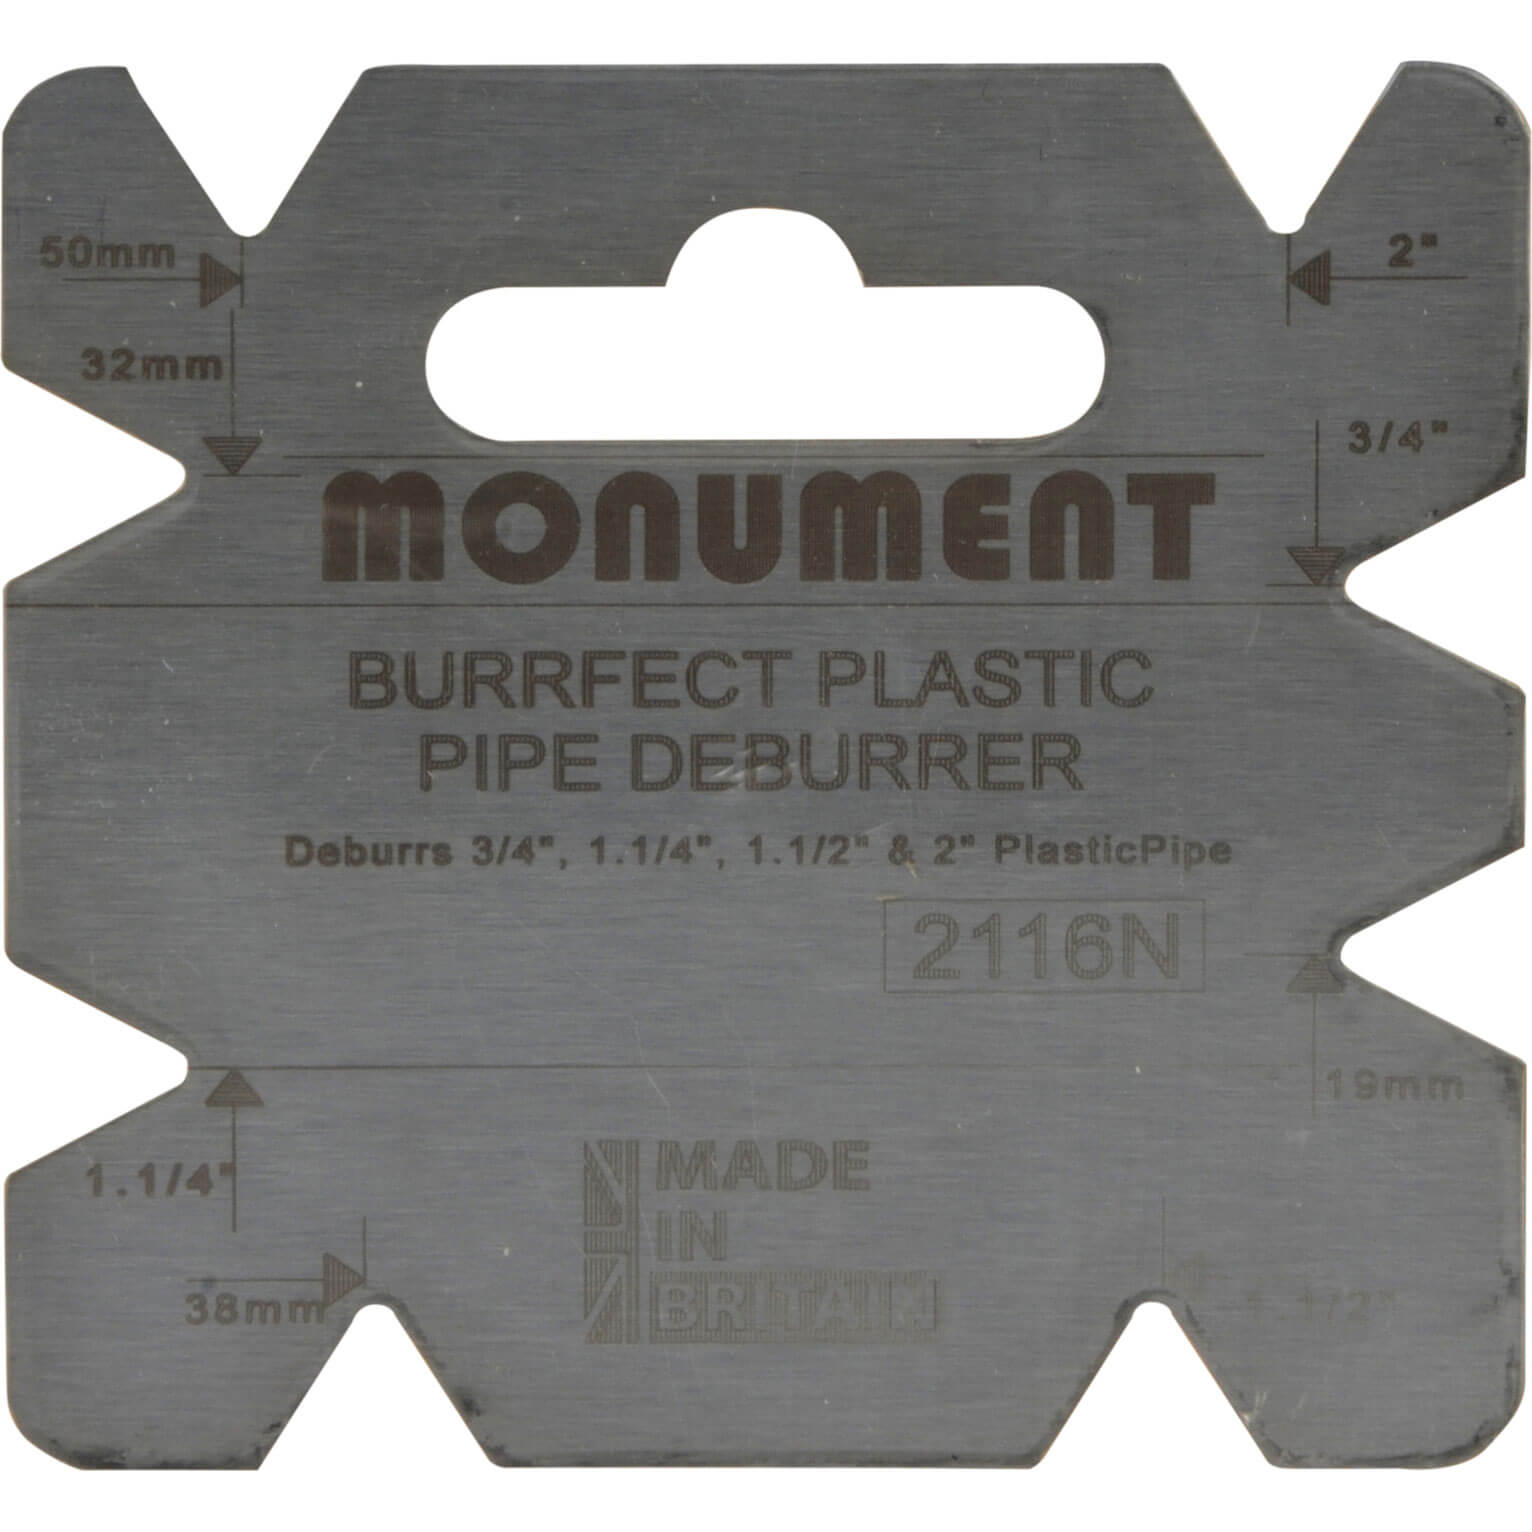 Image of Monument 2116N Burrfect Pipe Deburrer